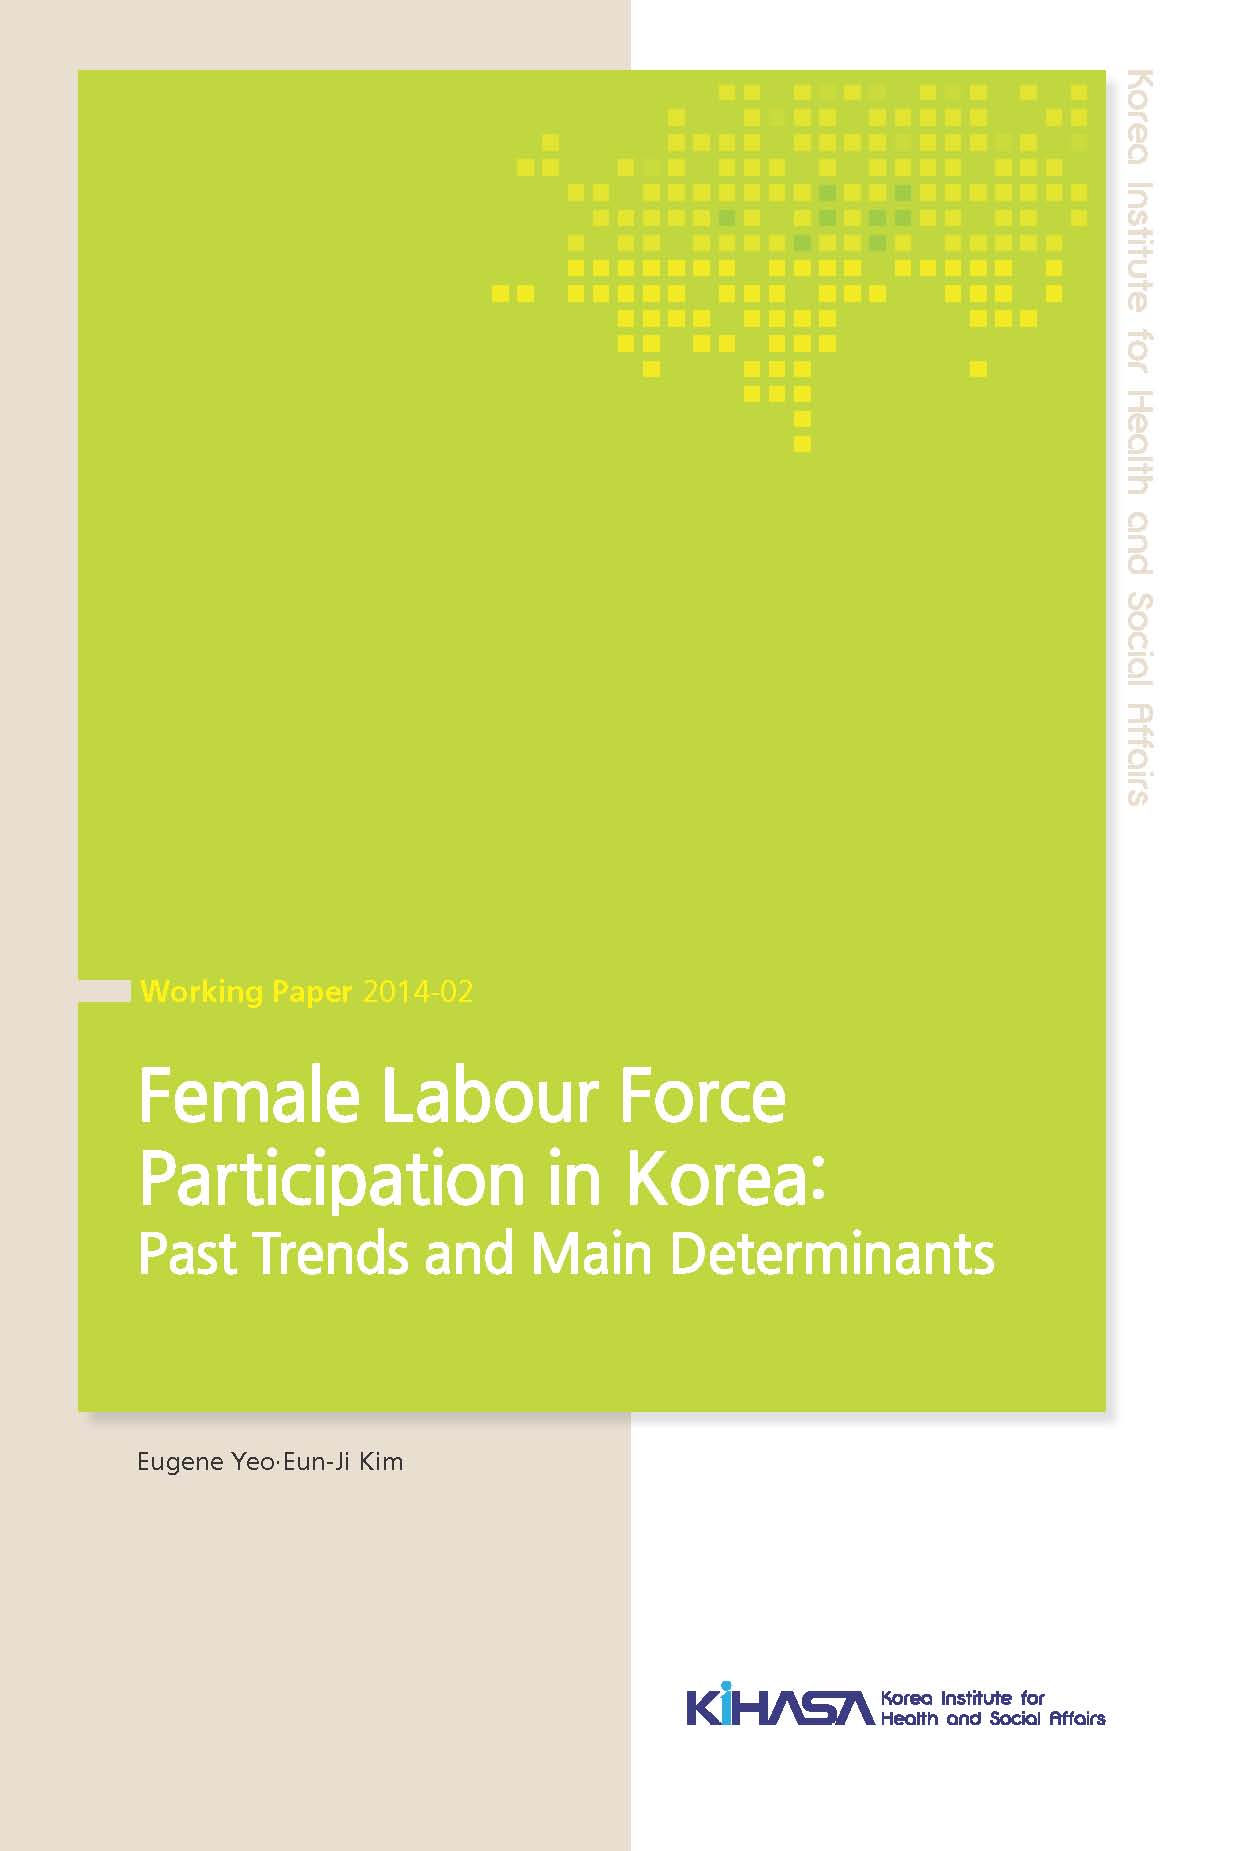 Female Labour Force Participation in Koare: Past Trends and Main Determinants